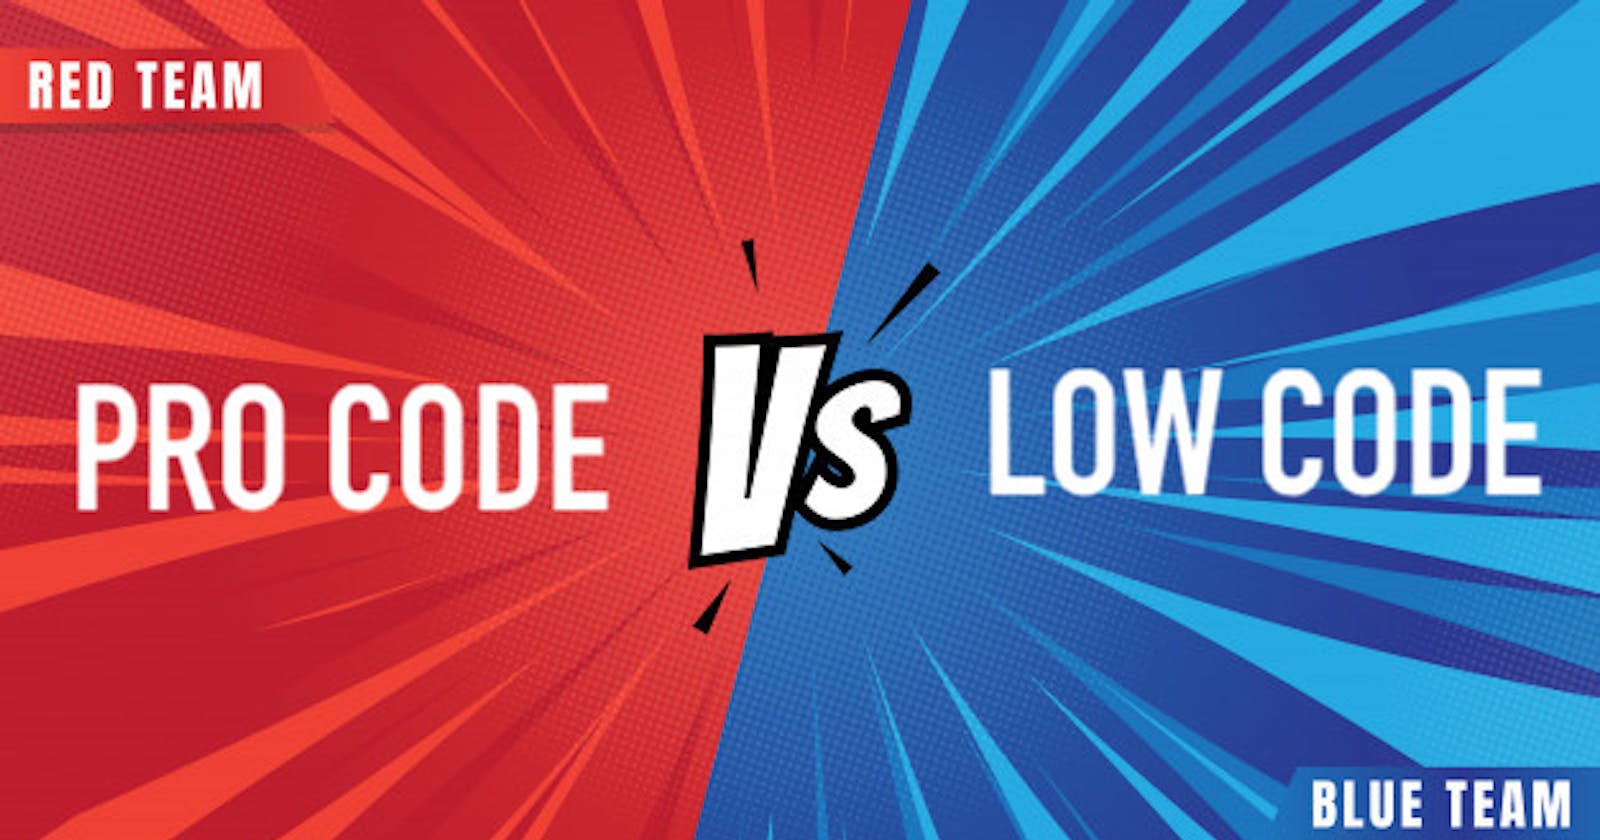 PRO CODE vs. LOW CODE.
How to select the best technology for your next project.